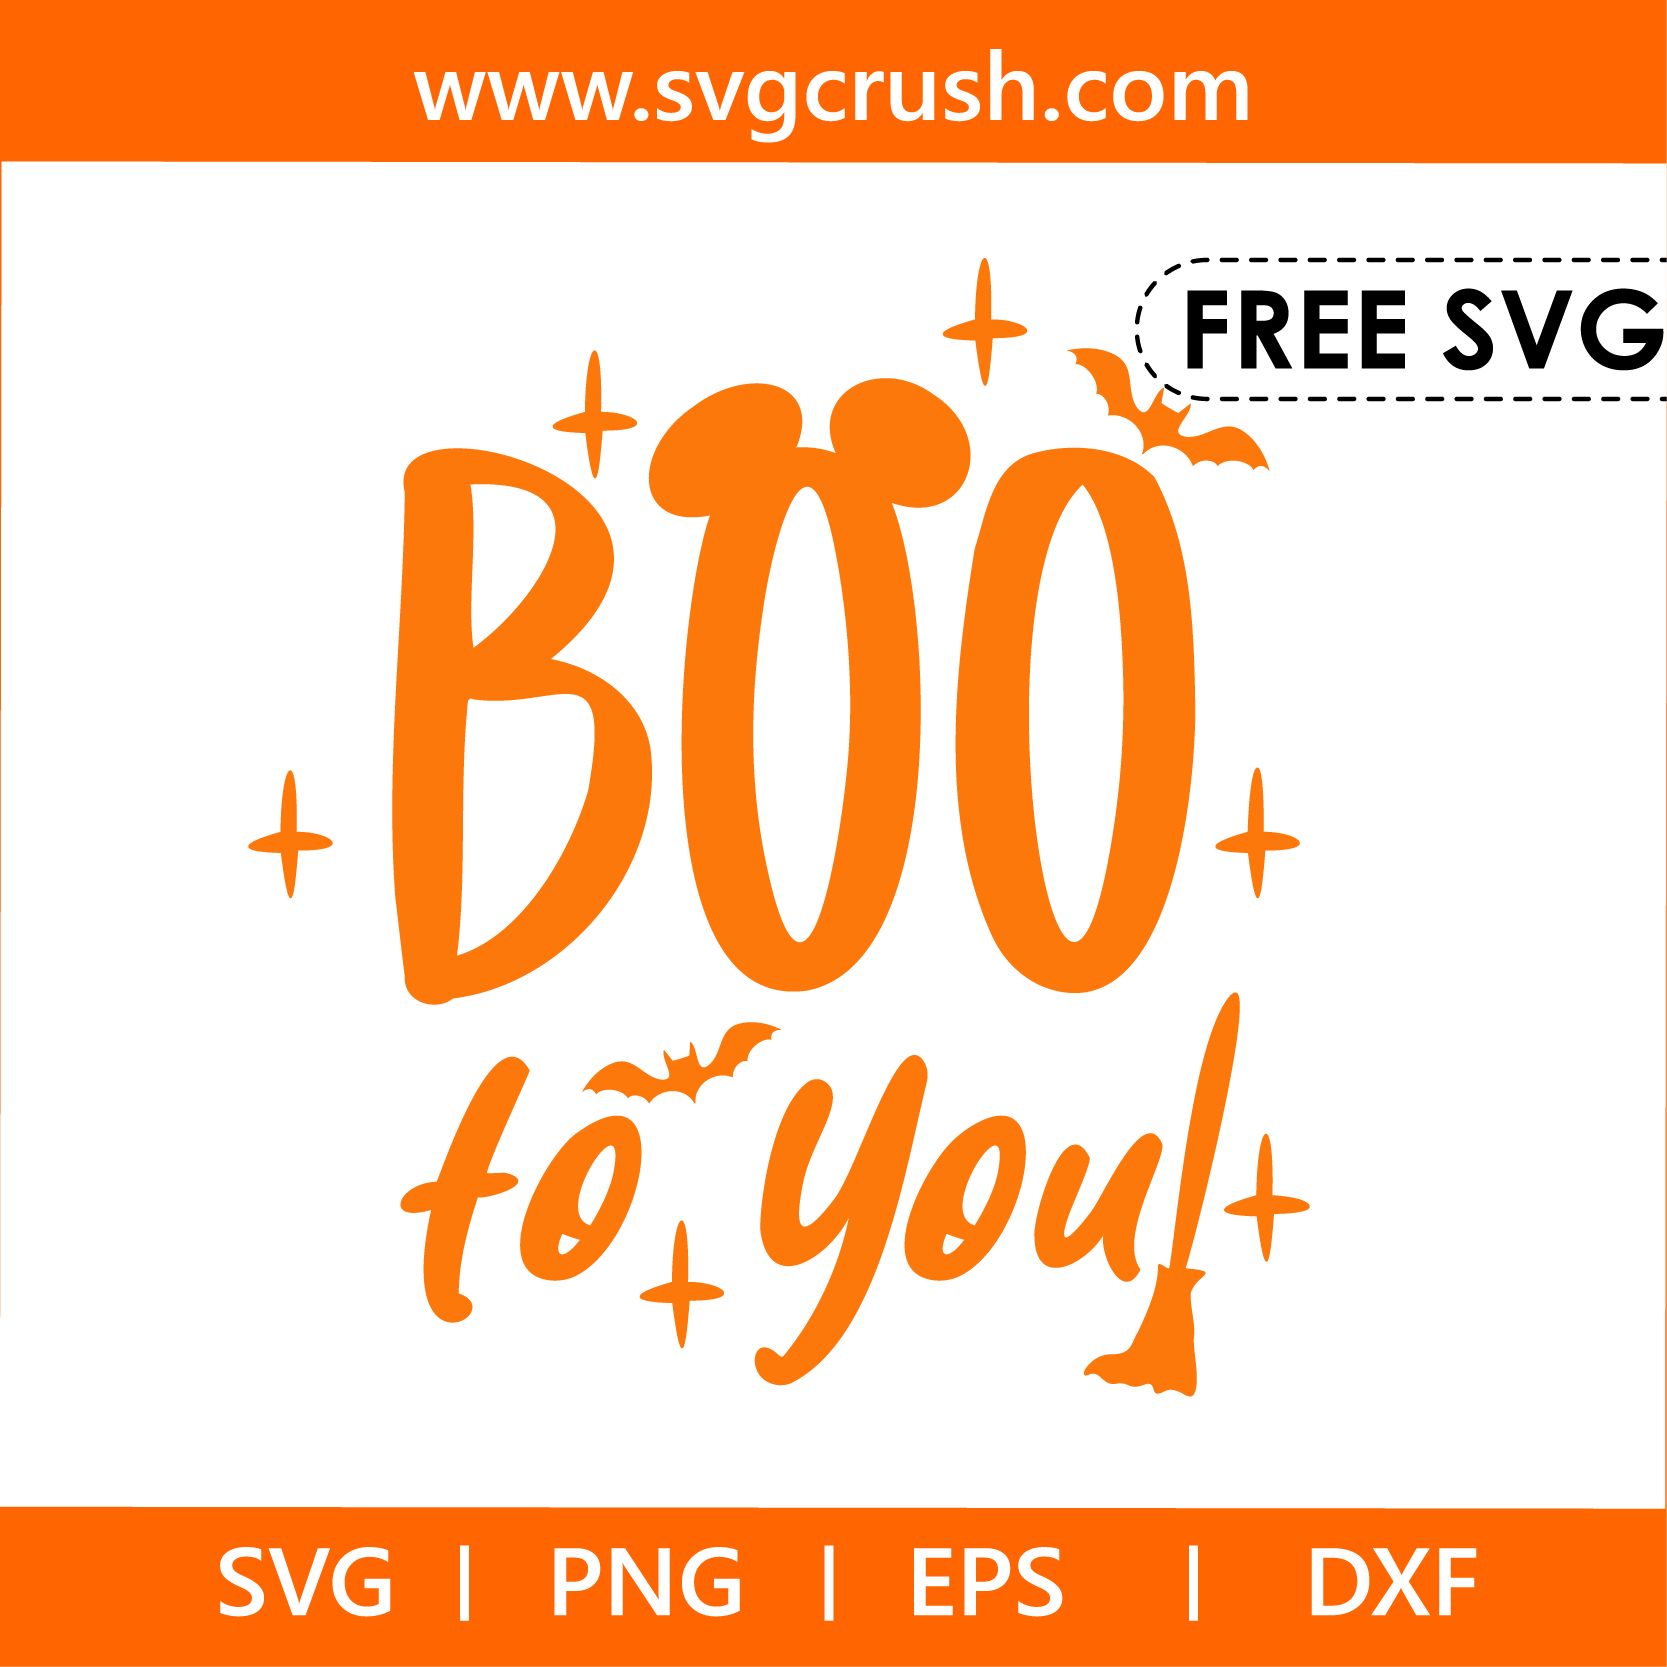 free boo-to-you-005 svg